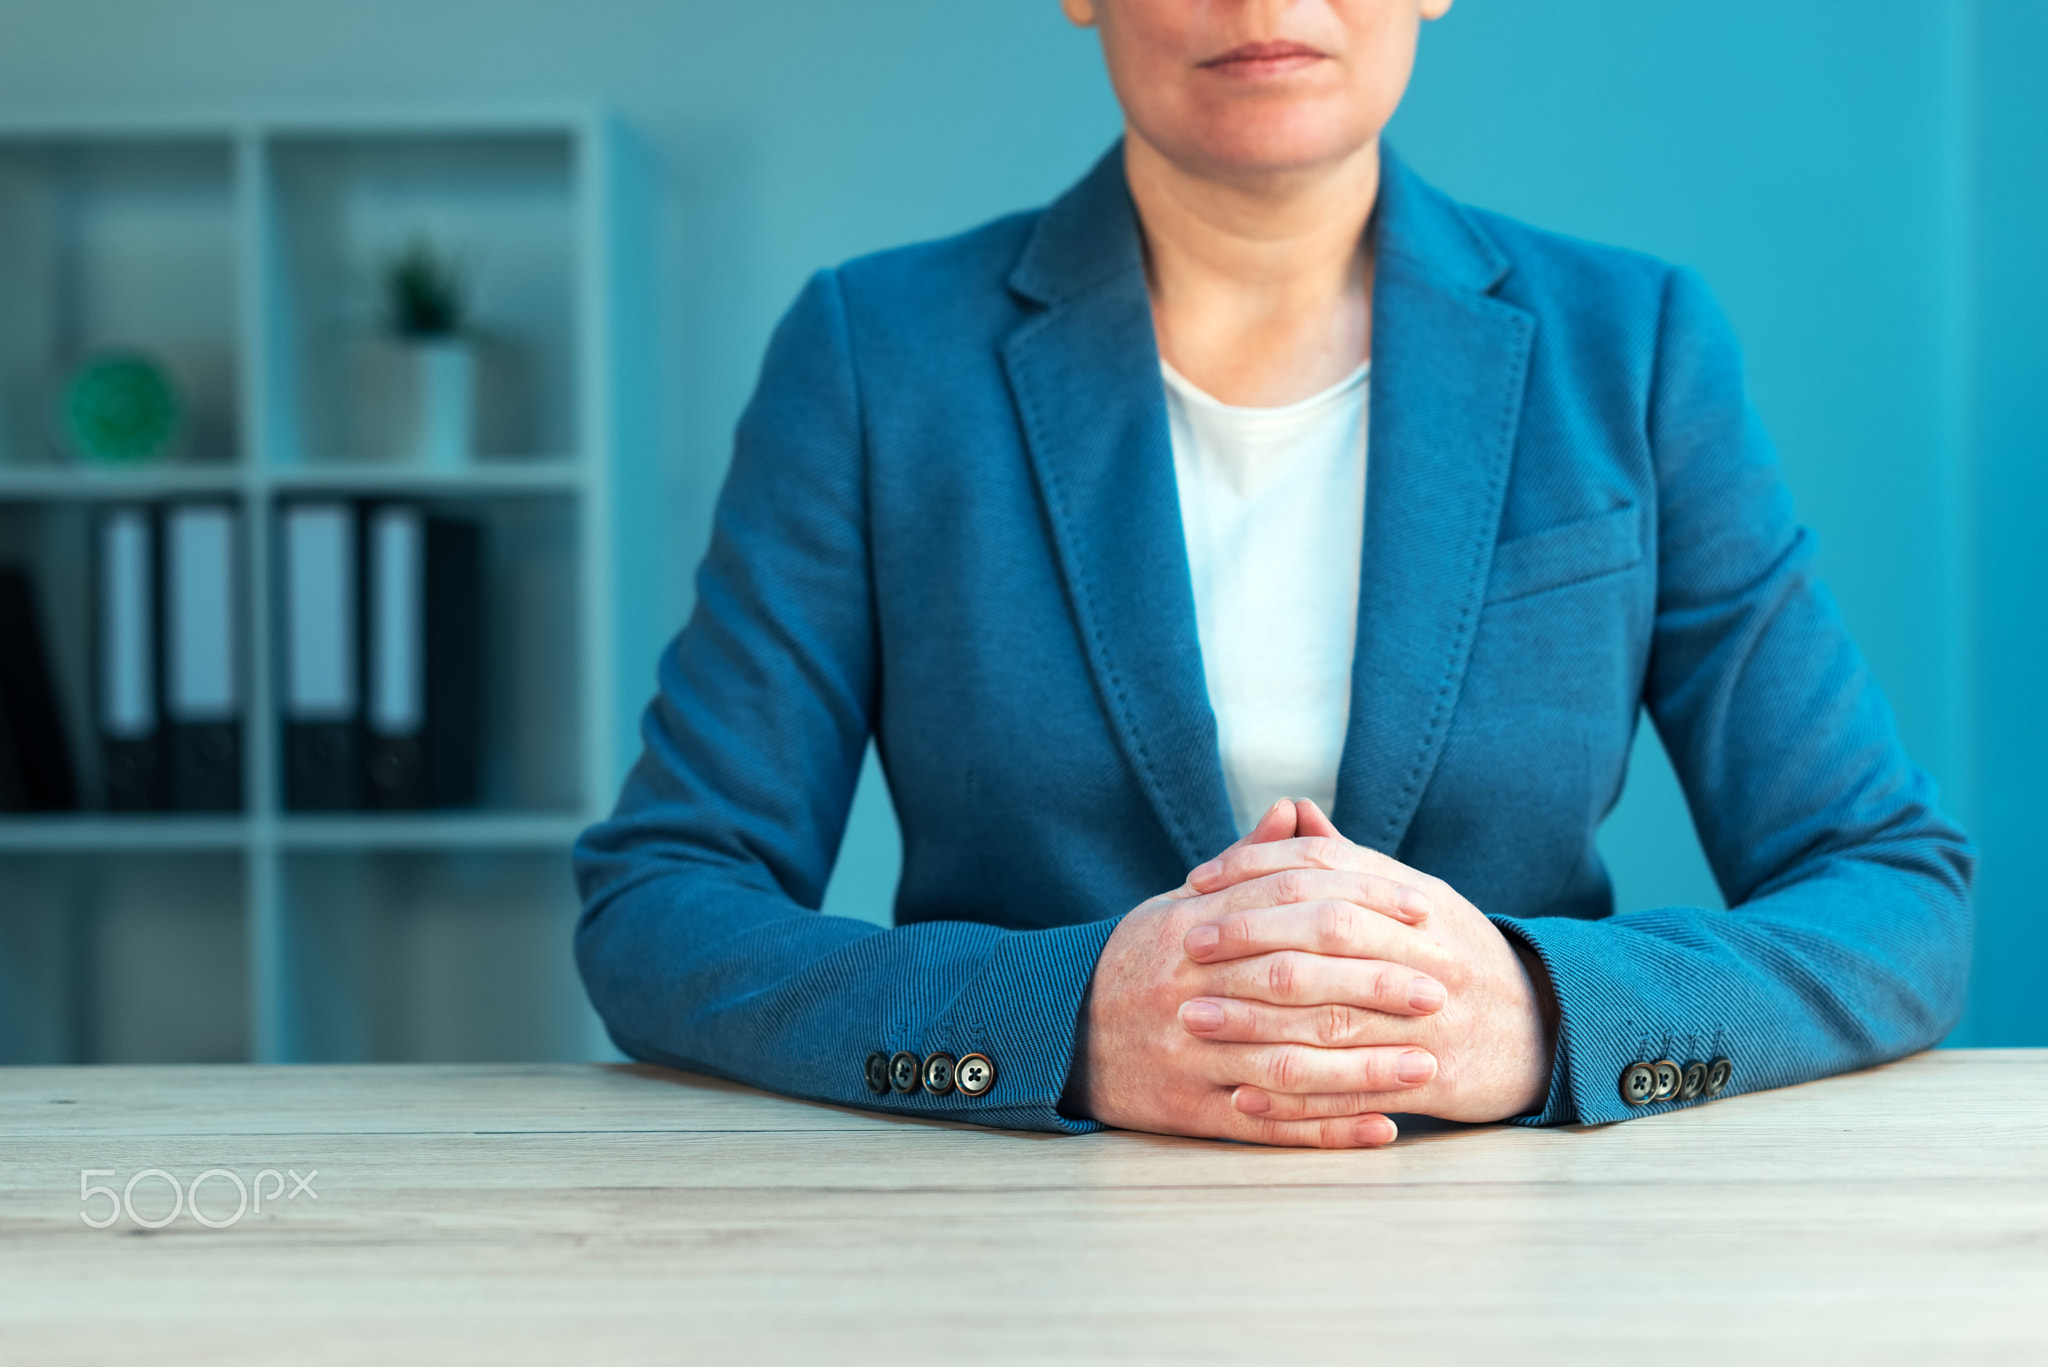 Business negotiation skills with female executive at office desk